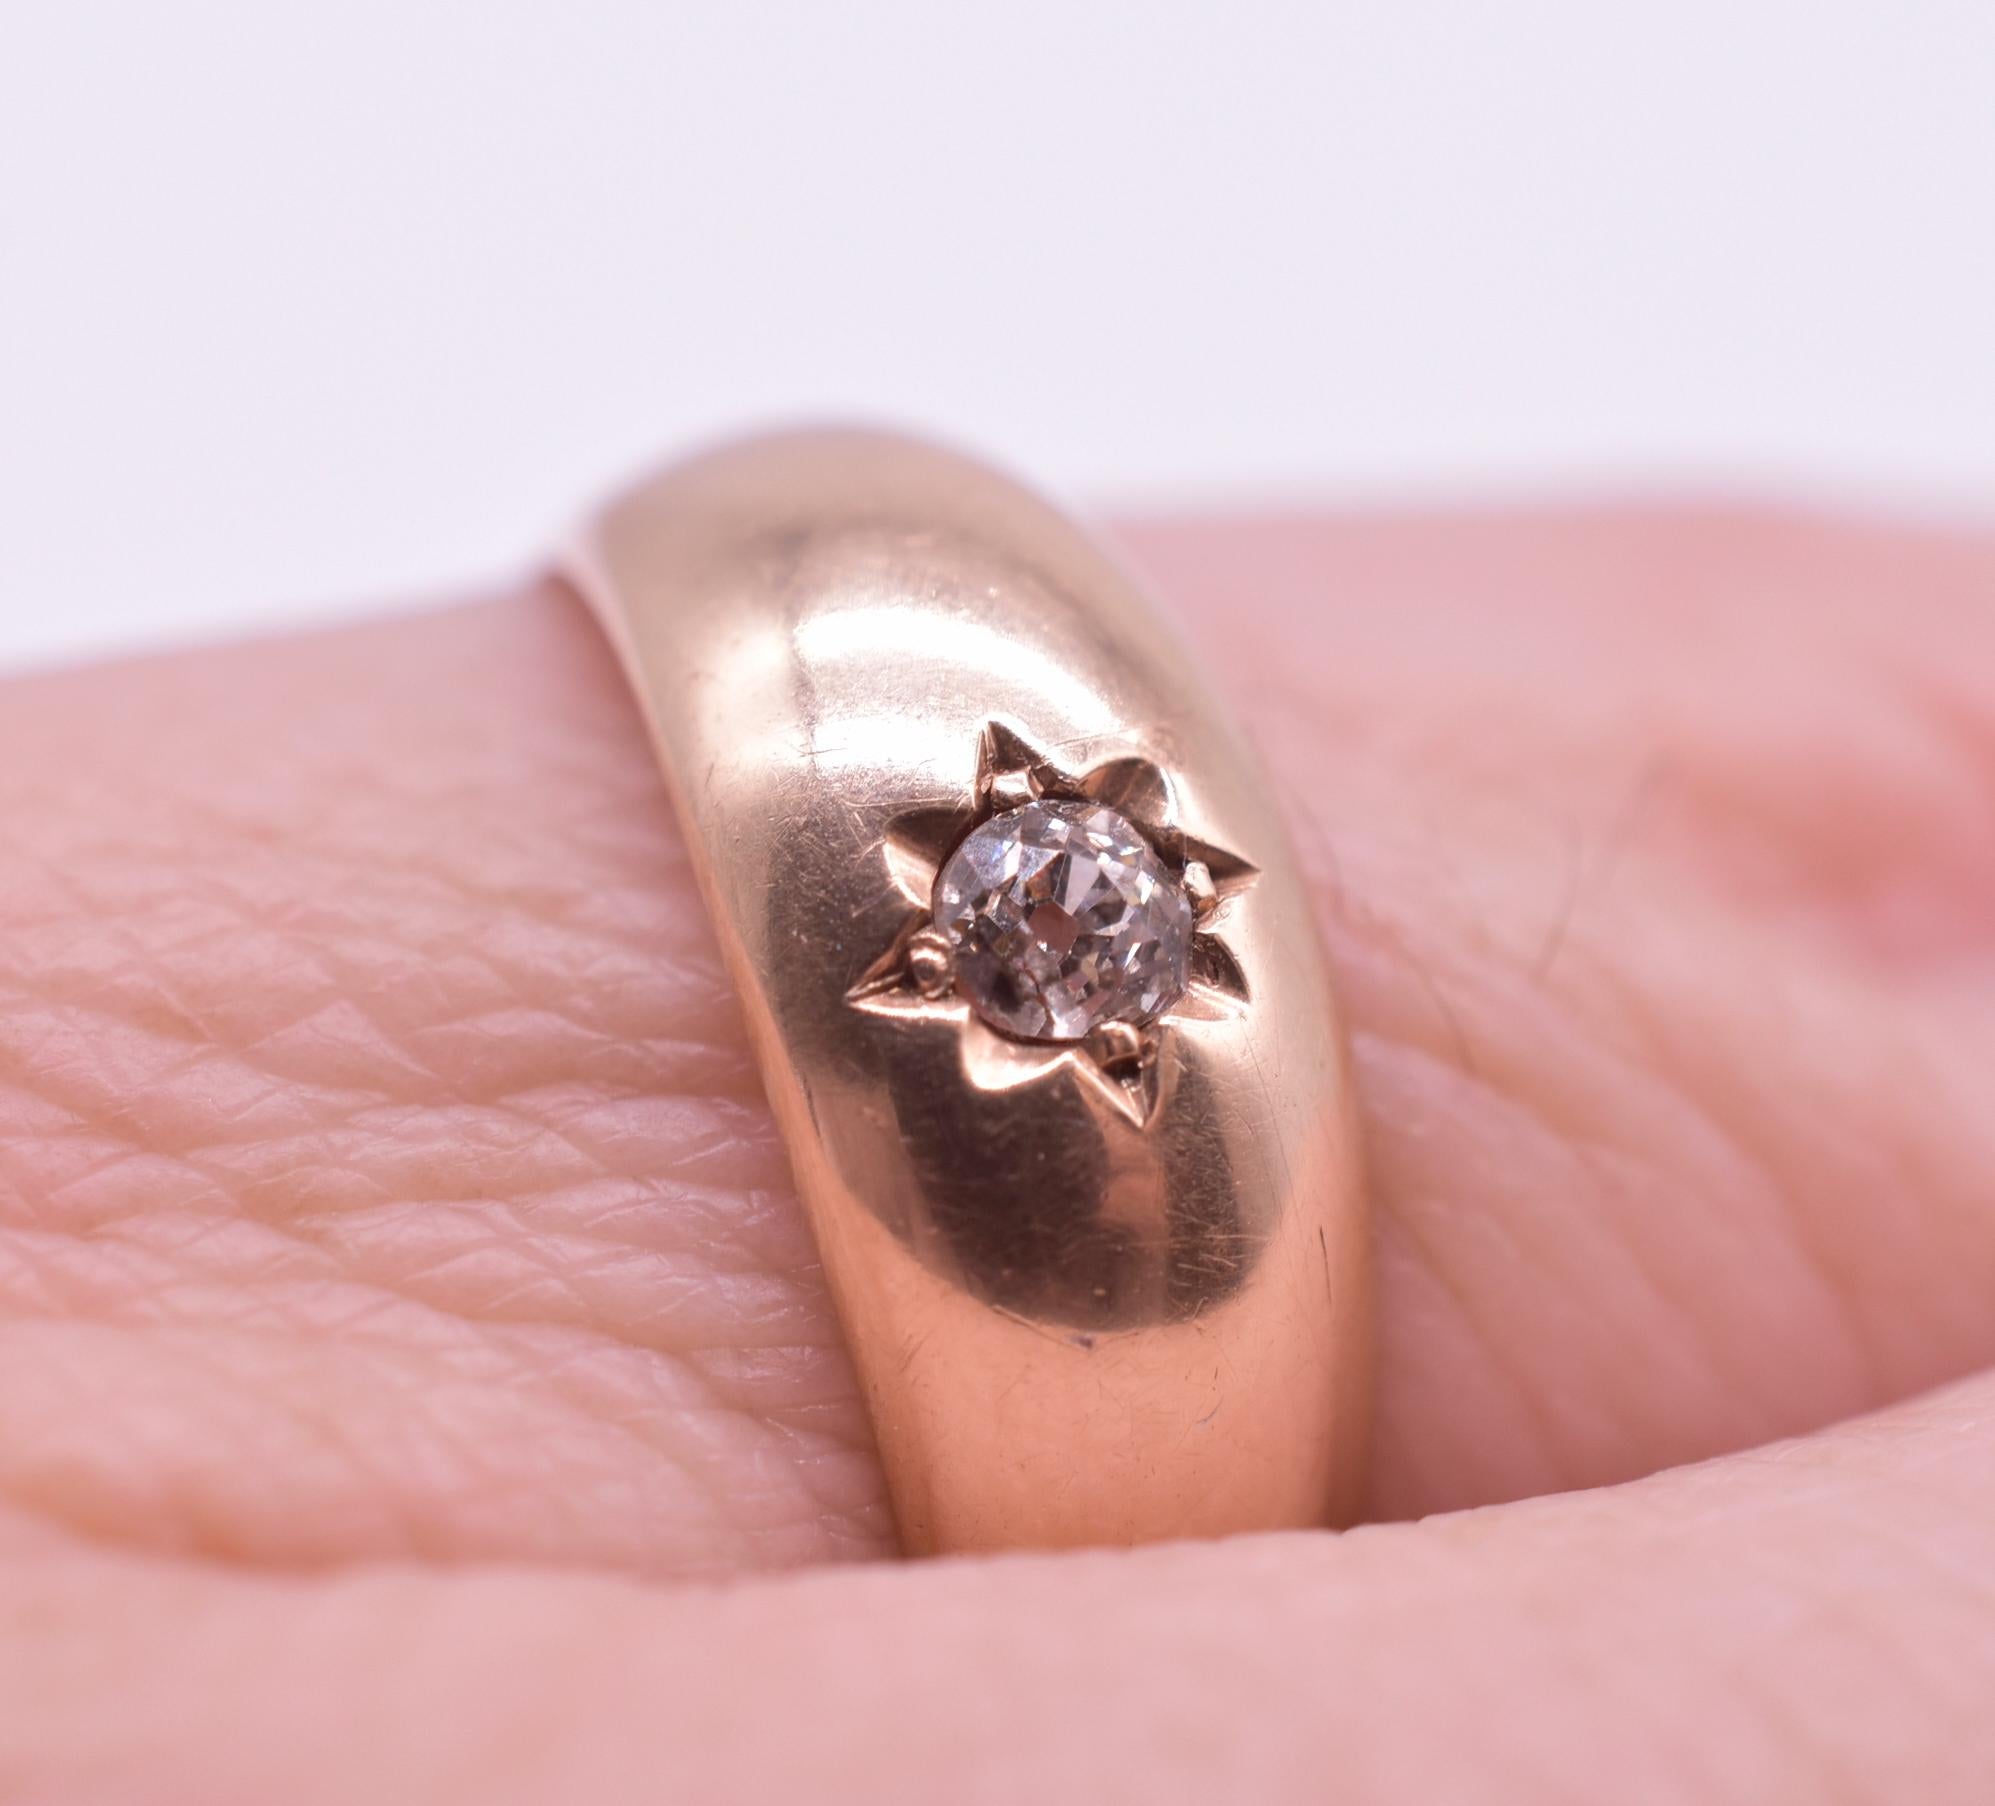 Victorian Flush Mount Band Ring with Single Diamond in Star Setting, HM Chester, 1890